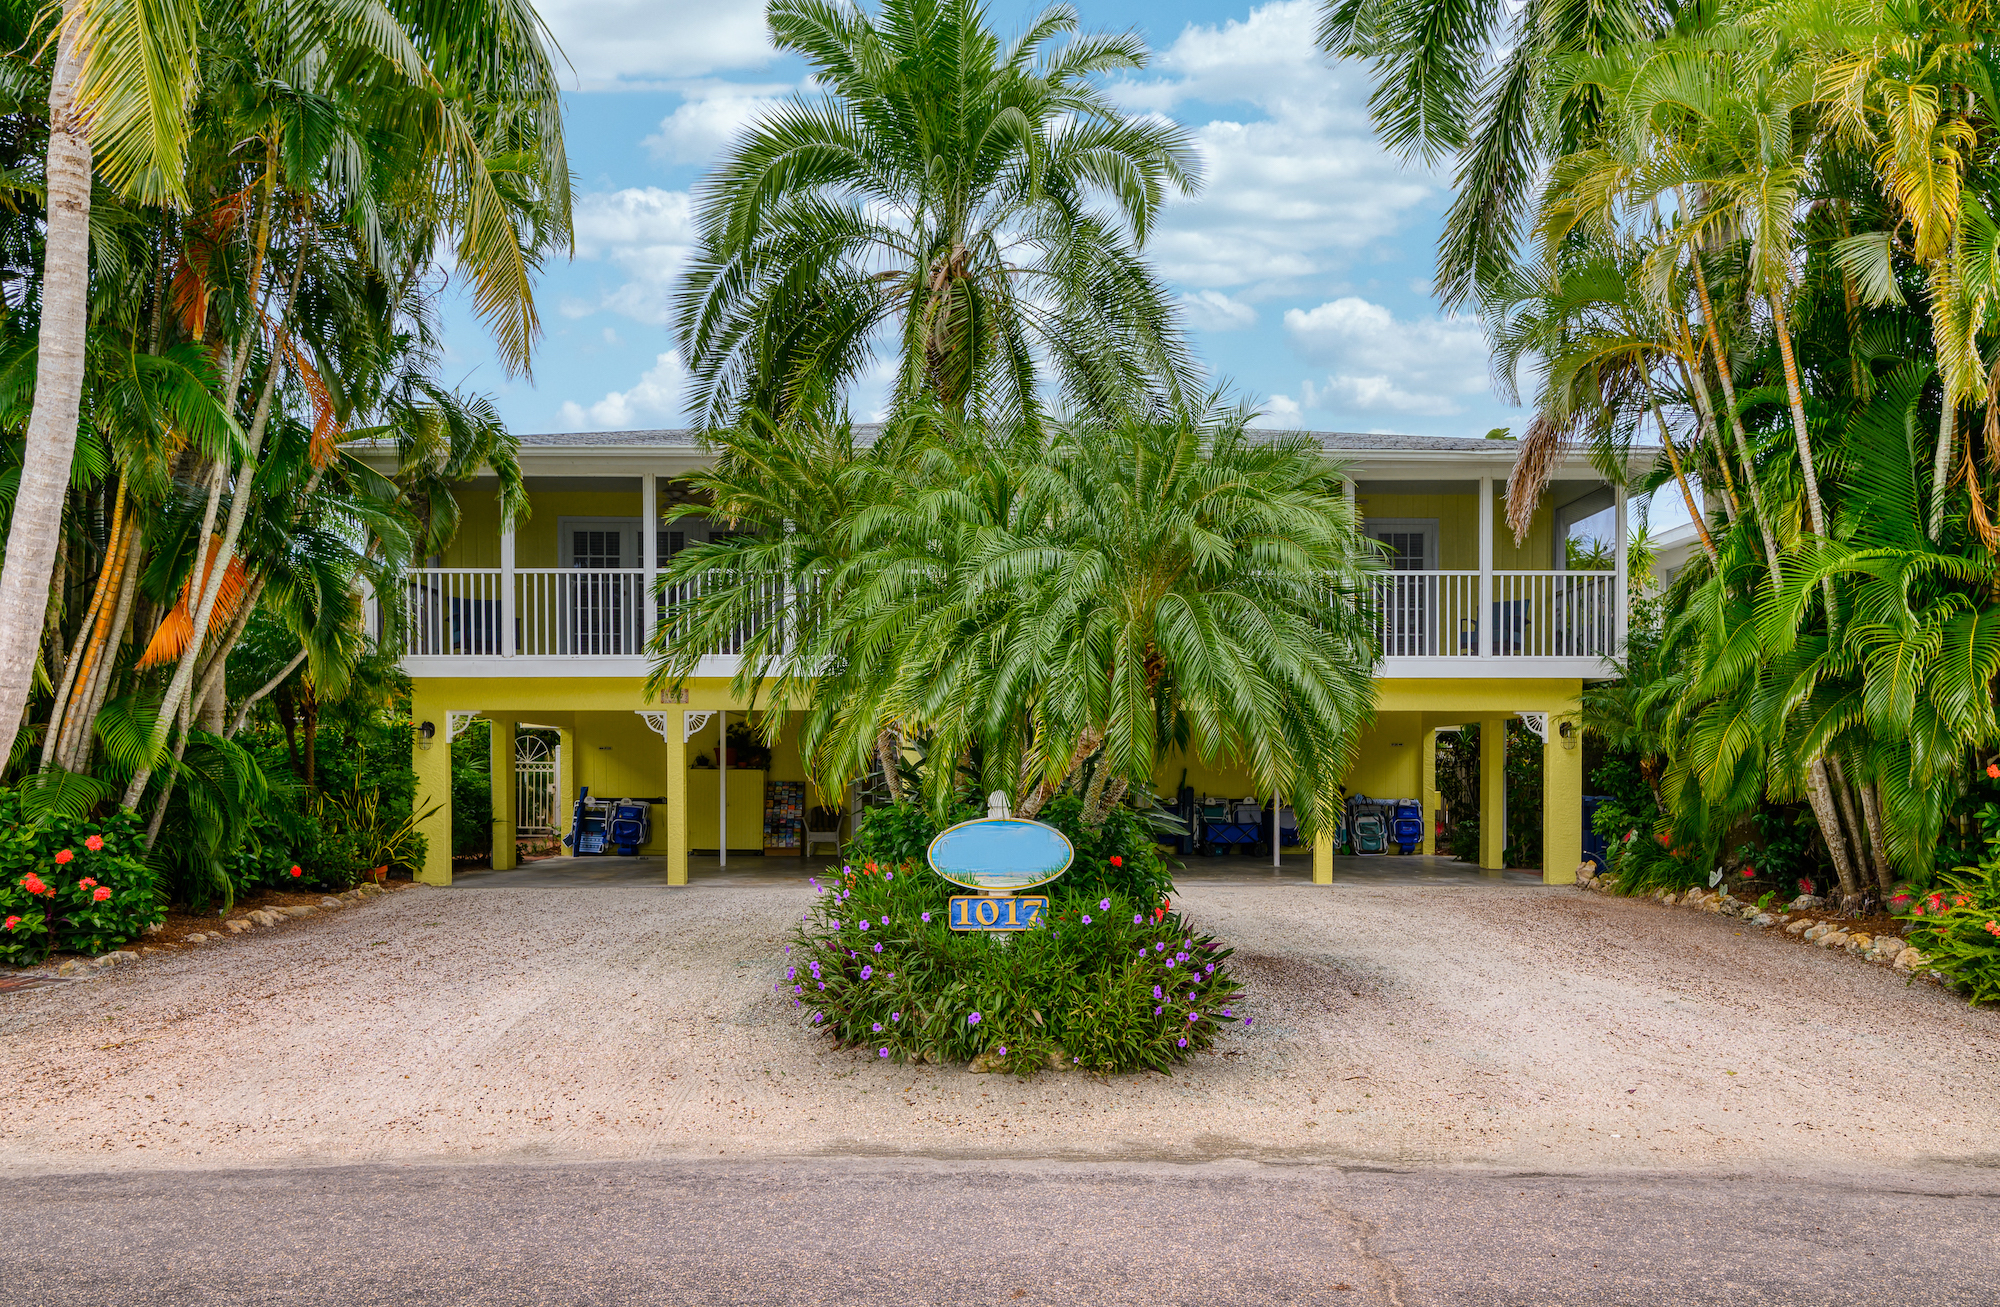 Courtesy. The eight-unit Siesta Palms by the Beach is listed for $3.5 million.